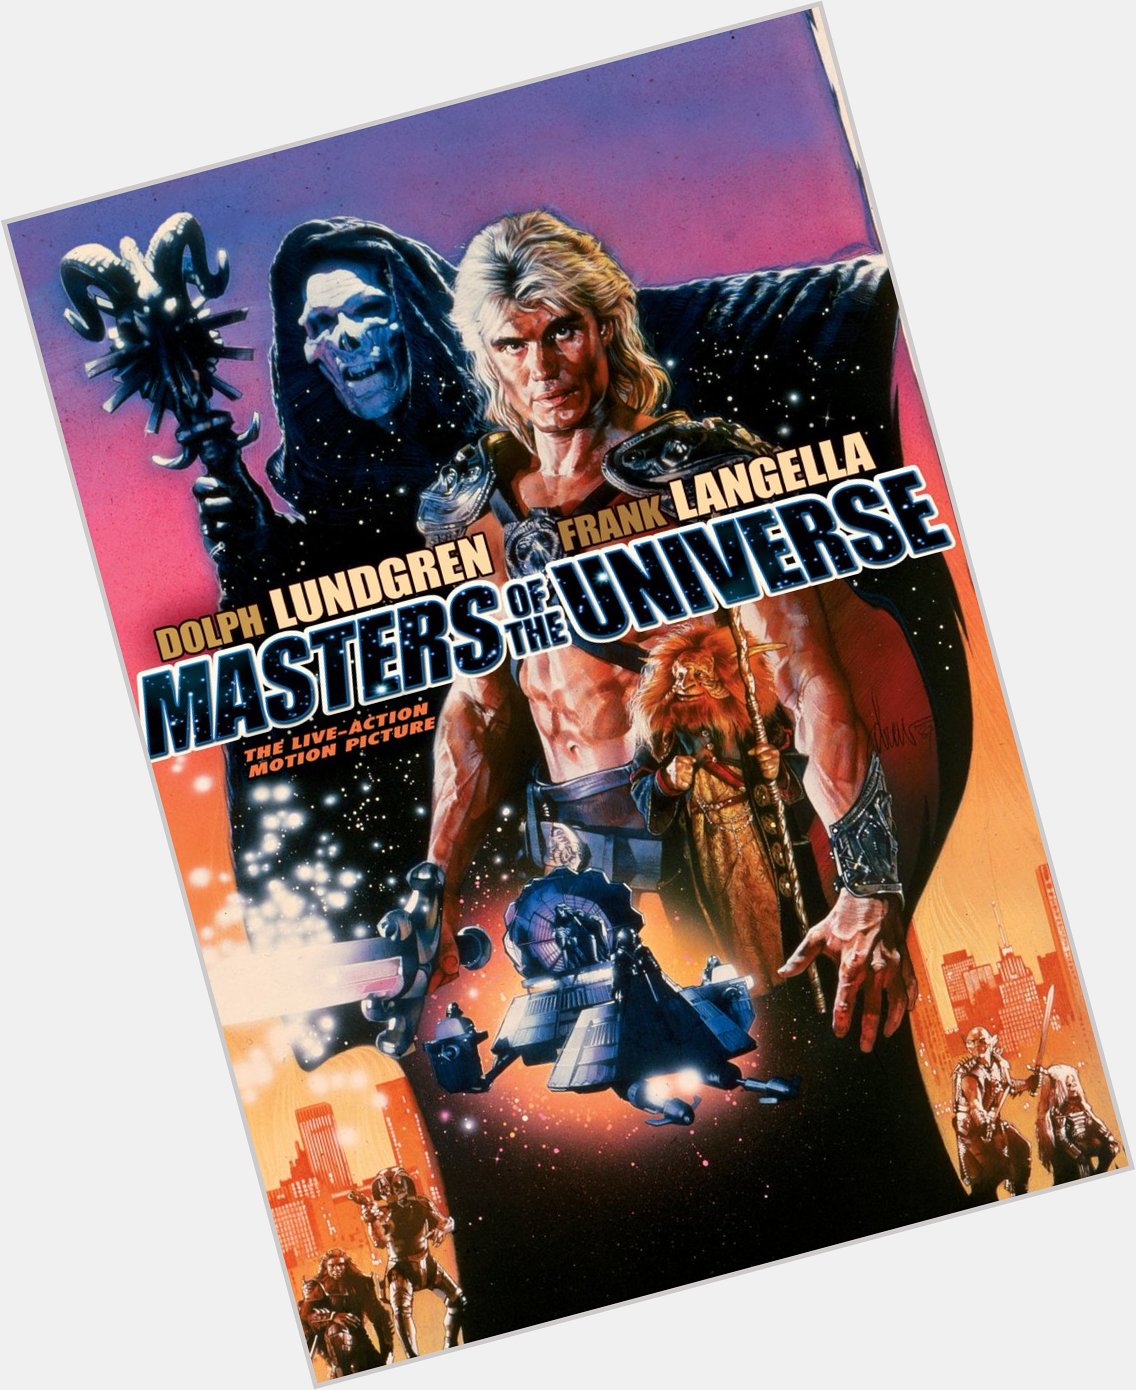 Masters of the Universe  (1987)
Happy Birthday, Meg Foster! 